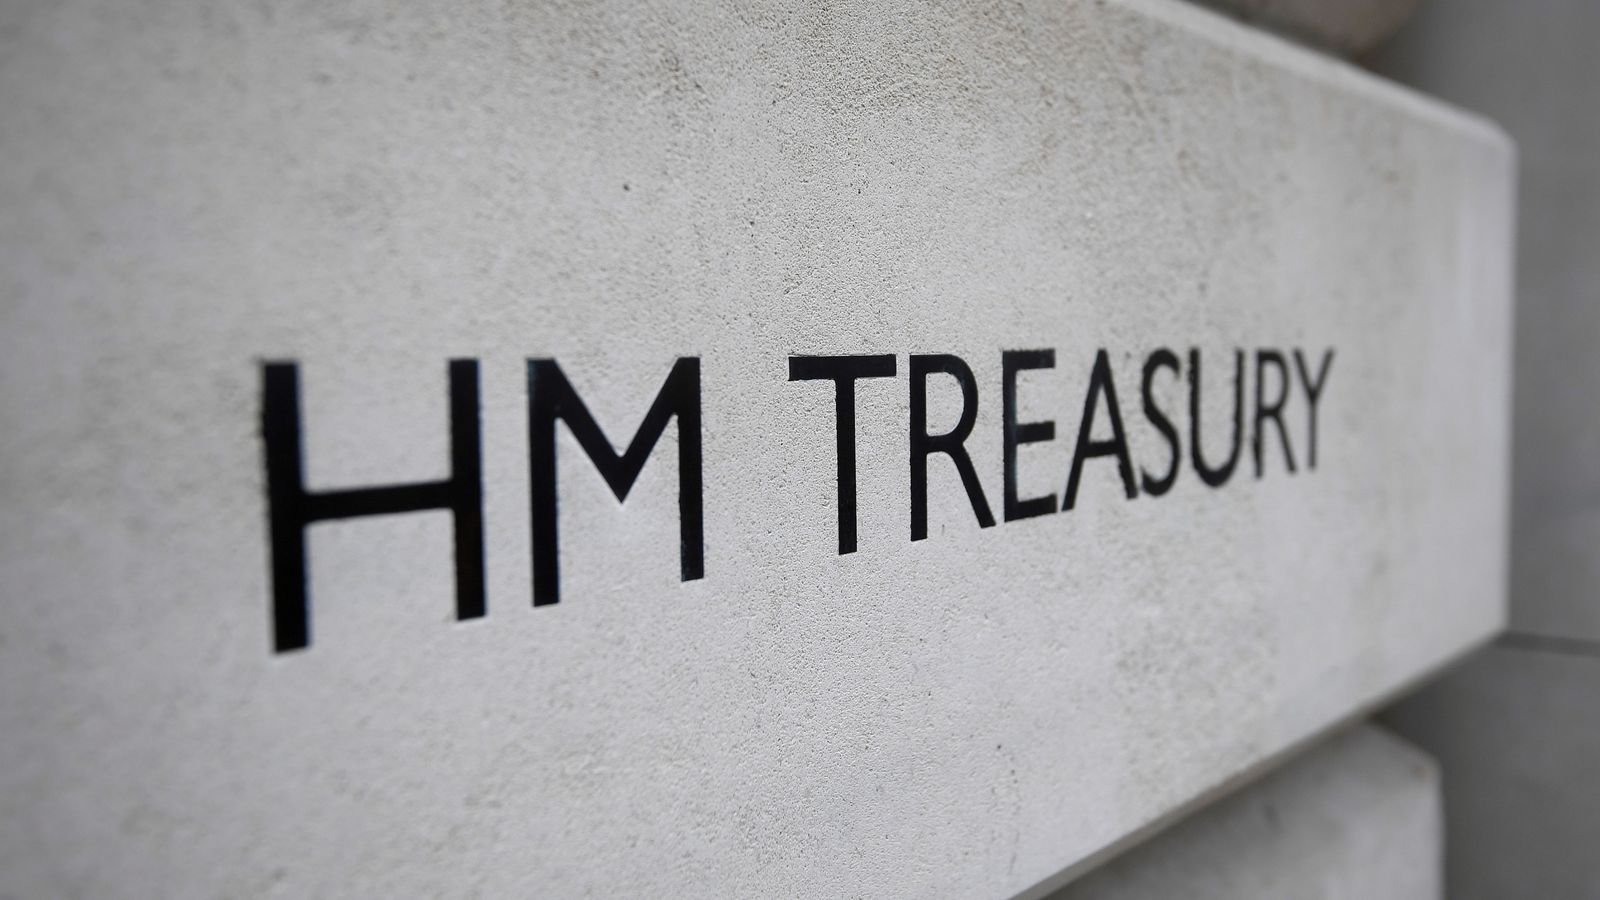 Plunge in value of Treasury bond fund could cost £8,900 for every household in UK, Labour says